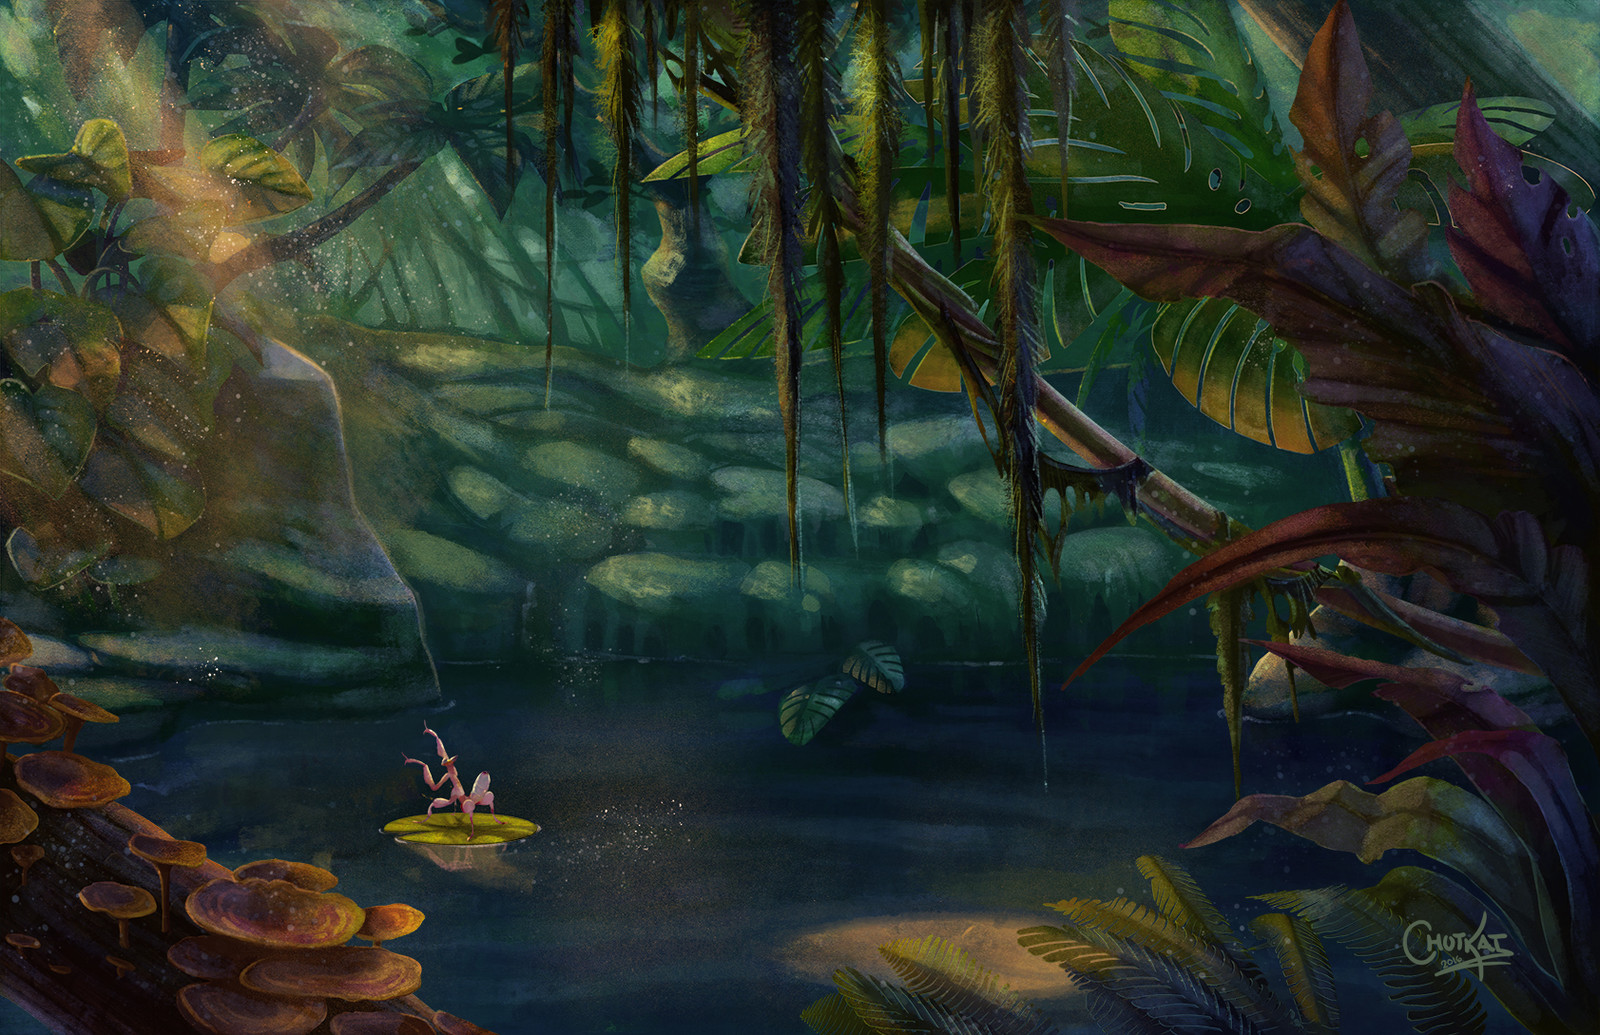 Final Background Illustration. - no character